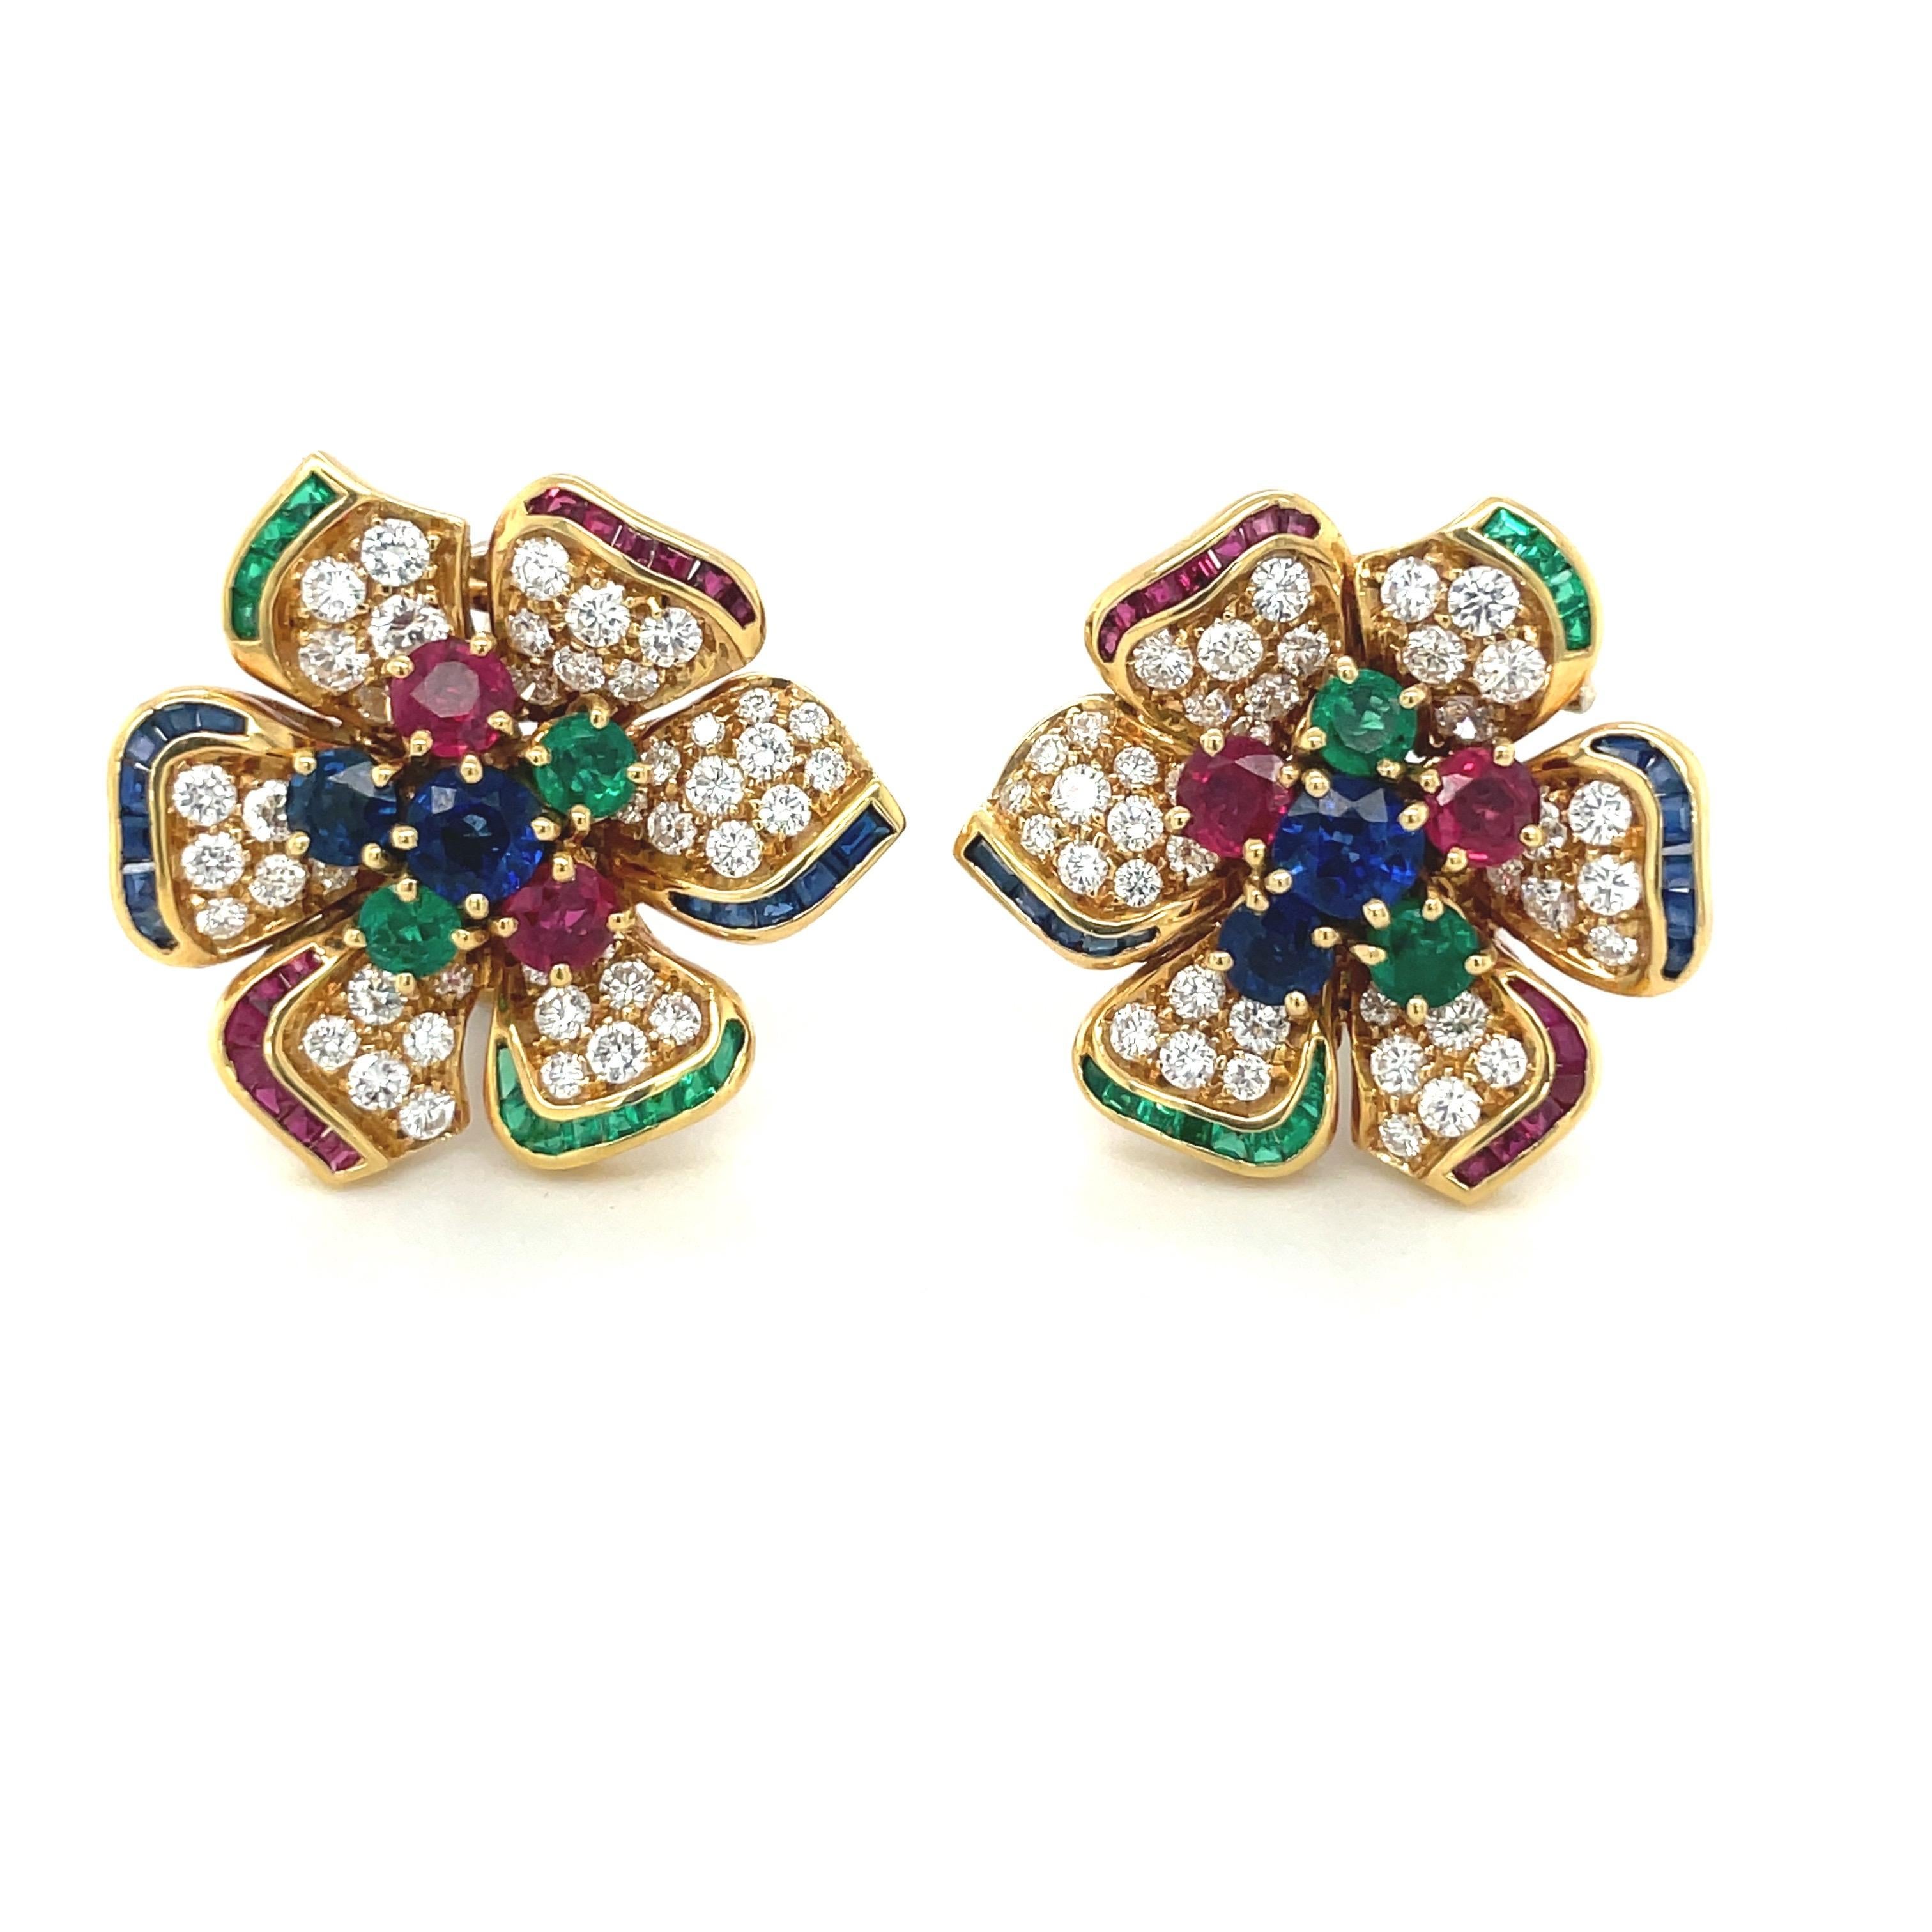 Magnificent 18 karat yellow gold flower earrings. The flowers 6 petals are set with round brilliant diamonds, each tipped with square cut stones in ruby, emerald and sapphires. The center of the earrings are set with round gem stones. This section